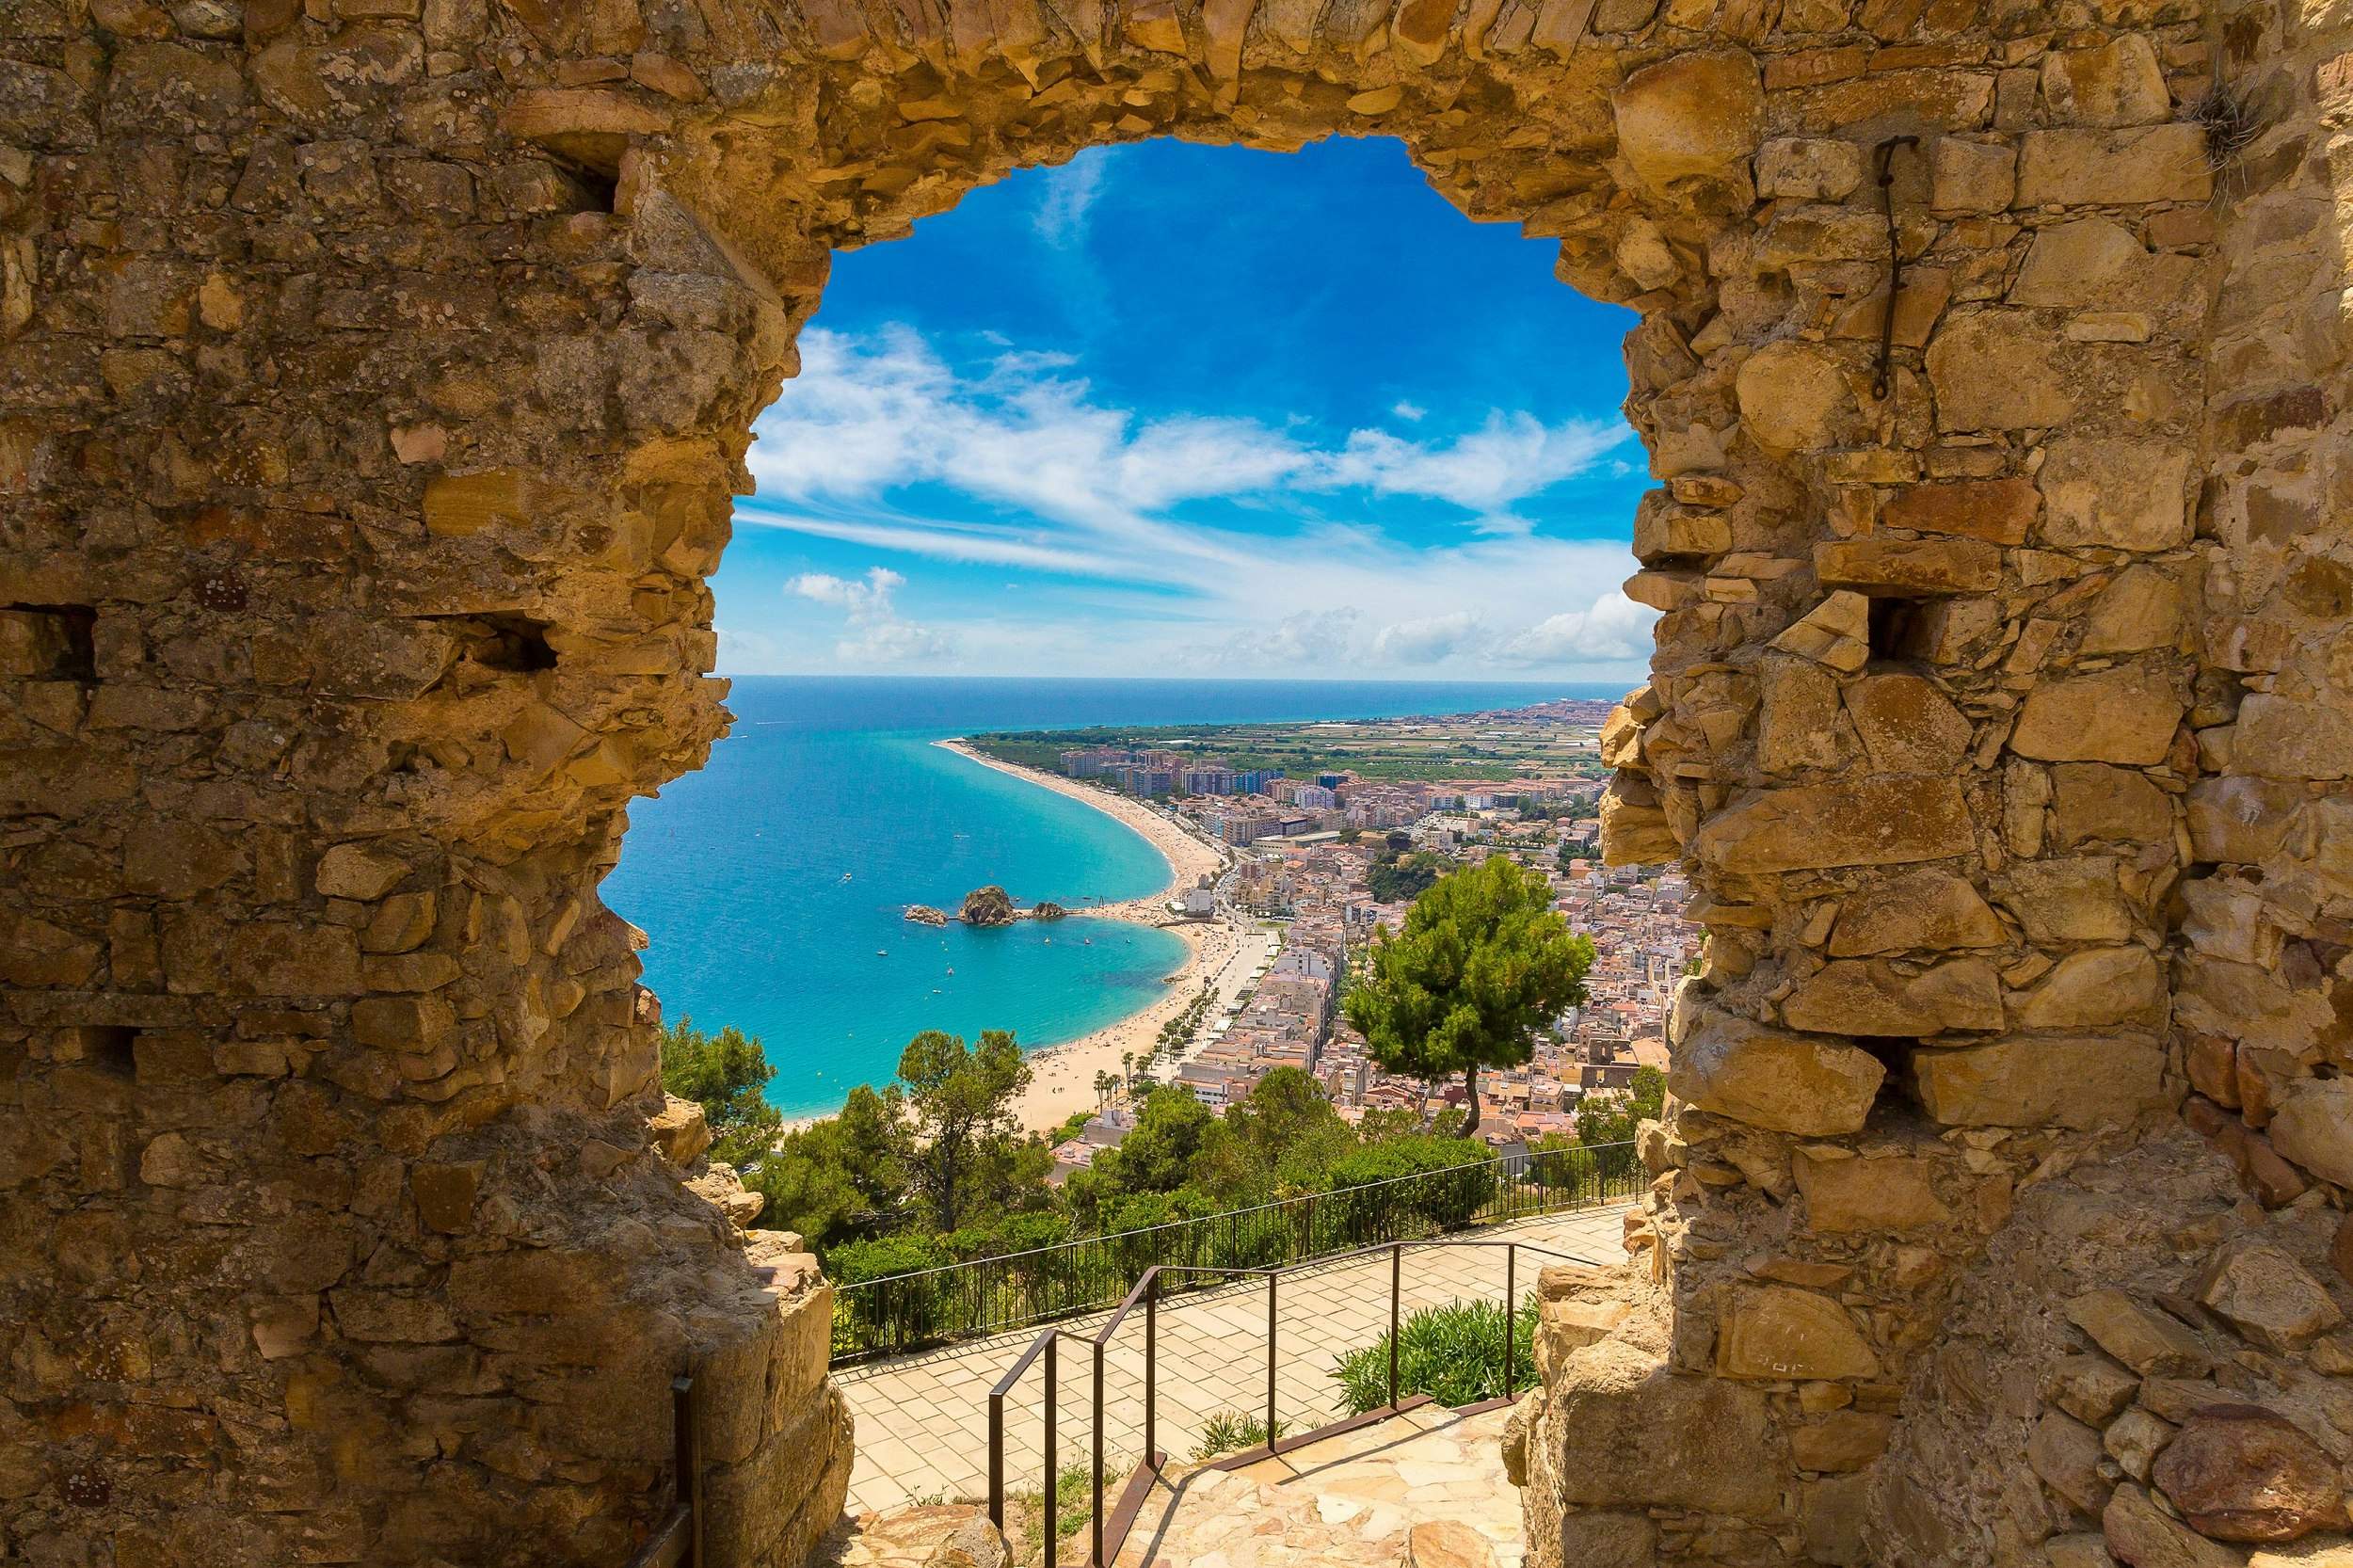 And aerial image of Blanes beach in the distance, through a stone door of St John Castle high above town.